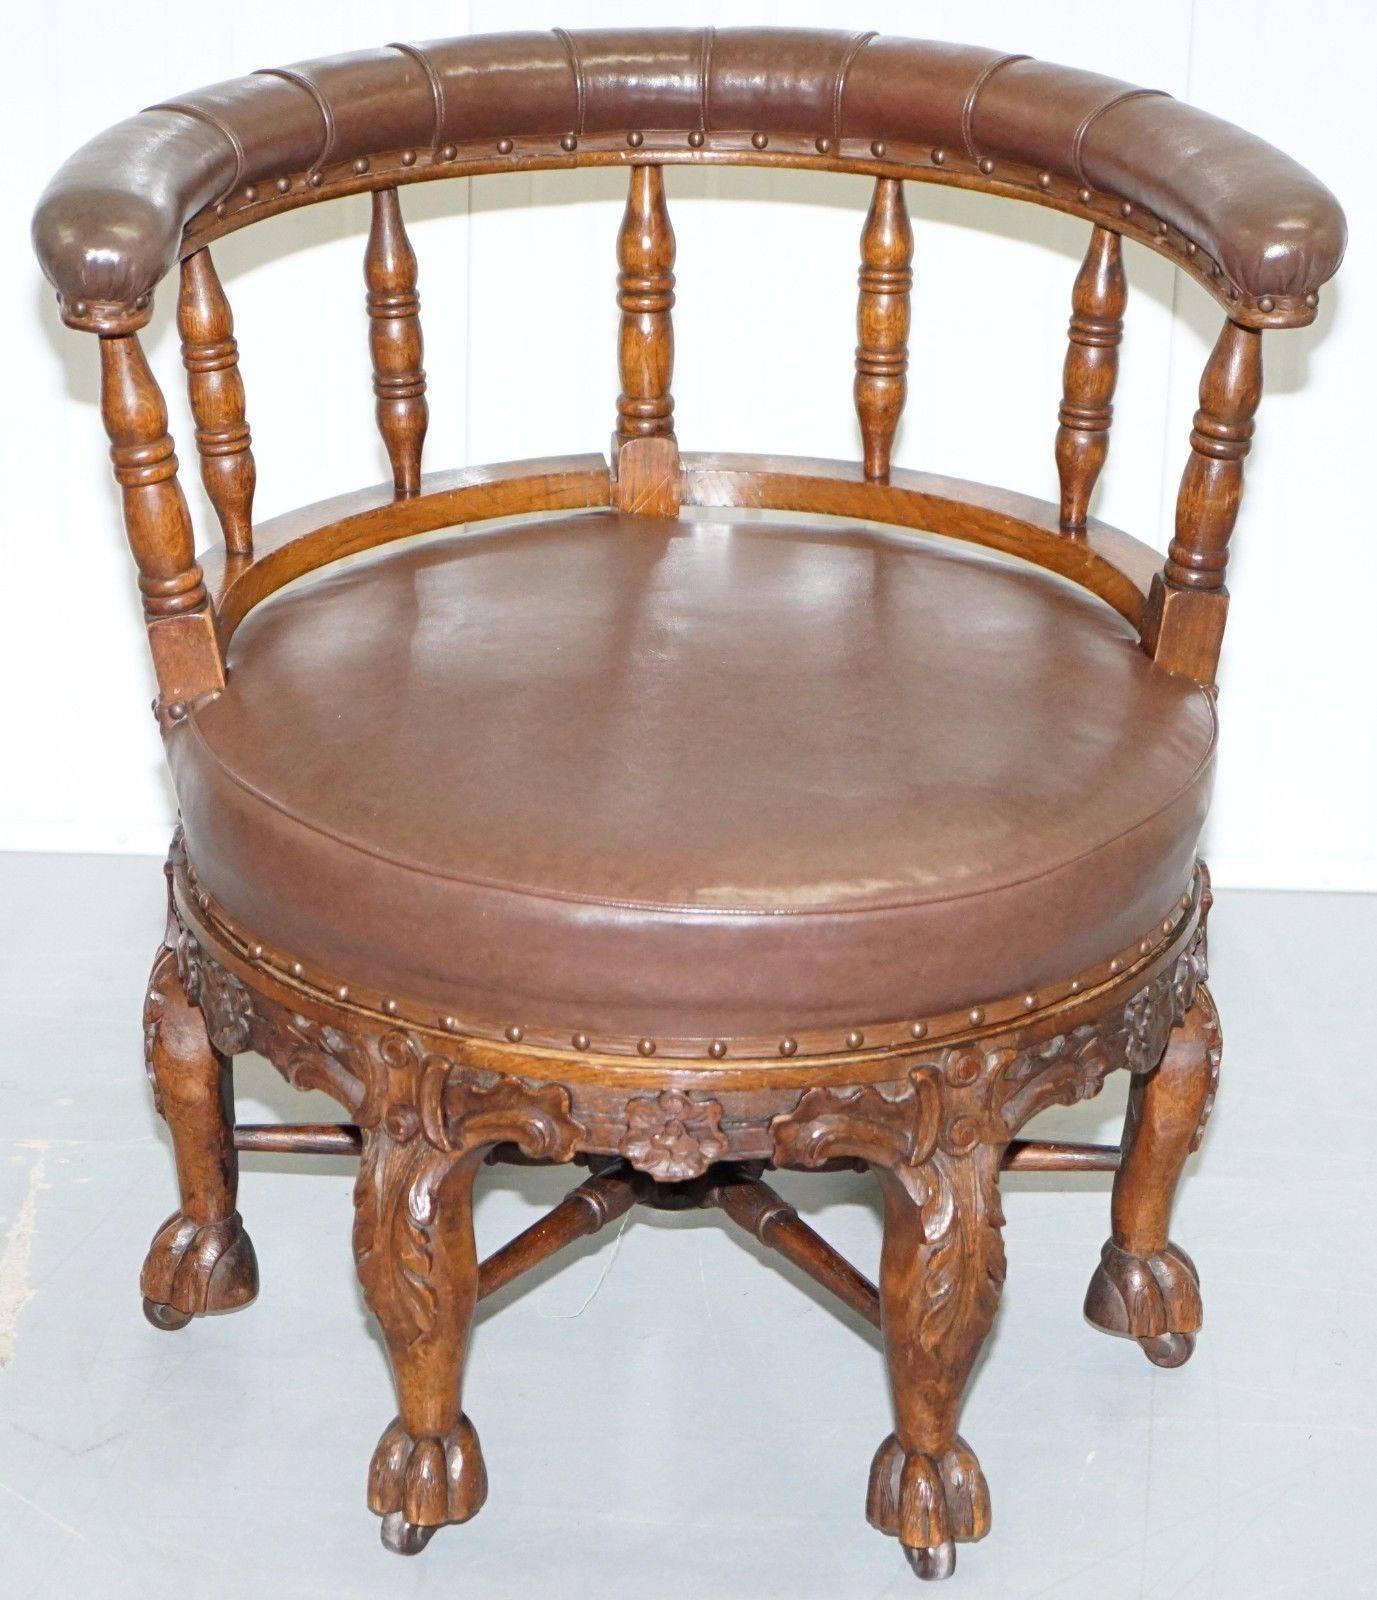 We are delighted to offer for sale this exceptionally rare, circa 1860 Dutch Colonial Burgermeister swivel chair with hand carved hairy paw feet retailed through J.J Alan LTD furniture depositories

A truly spectacular find in excellent condition